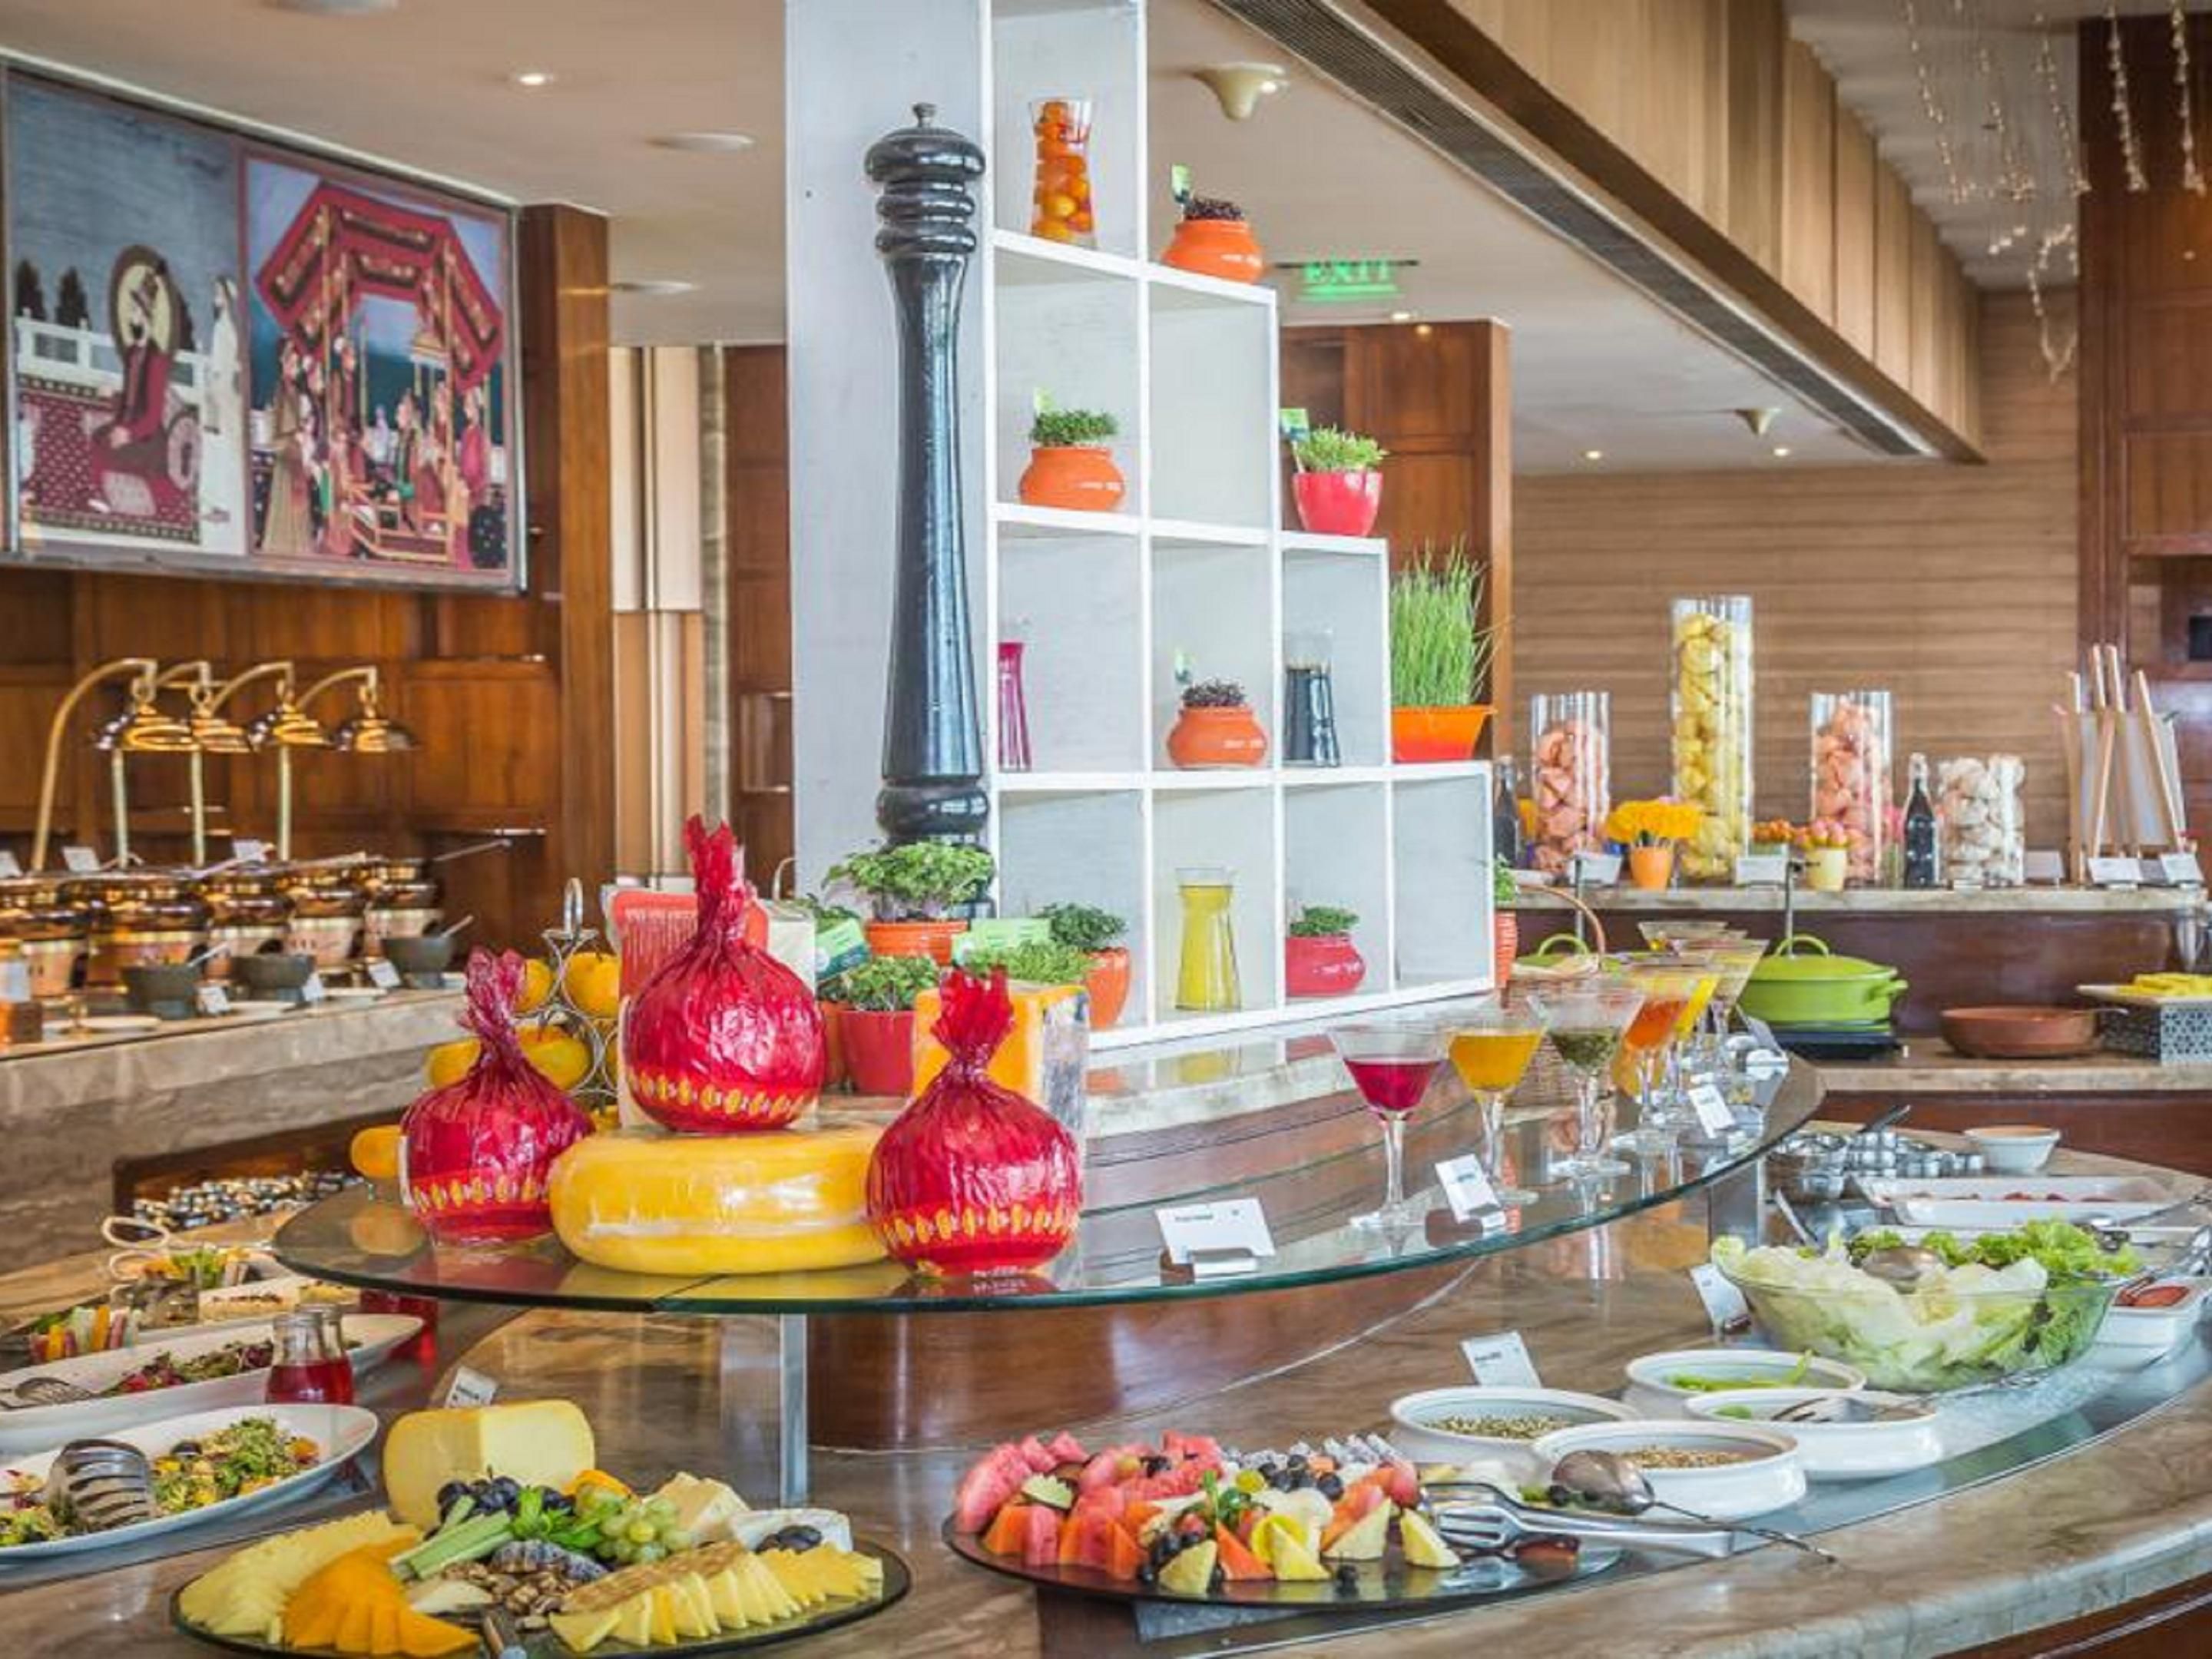 Let the many shades of vibrant flavors come alive as you treat your appetite to a scrumptious buffet spread of authentic delicacies and dig into a delectable delight. Explore and experience a plethora of preparations for lunch or dinner at Monarch.